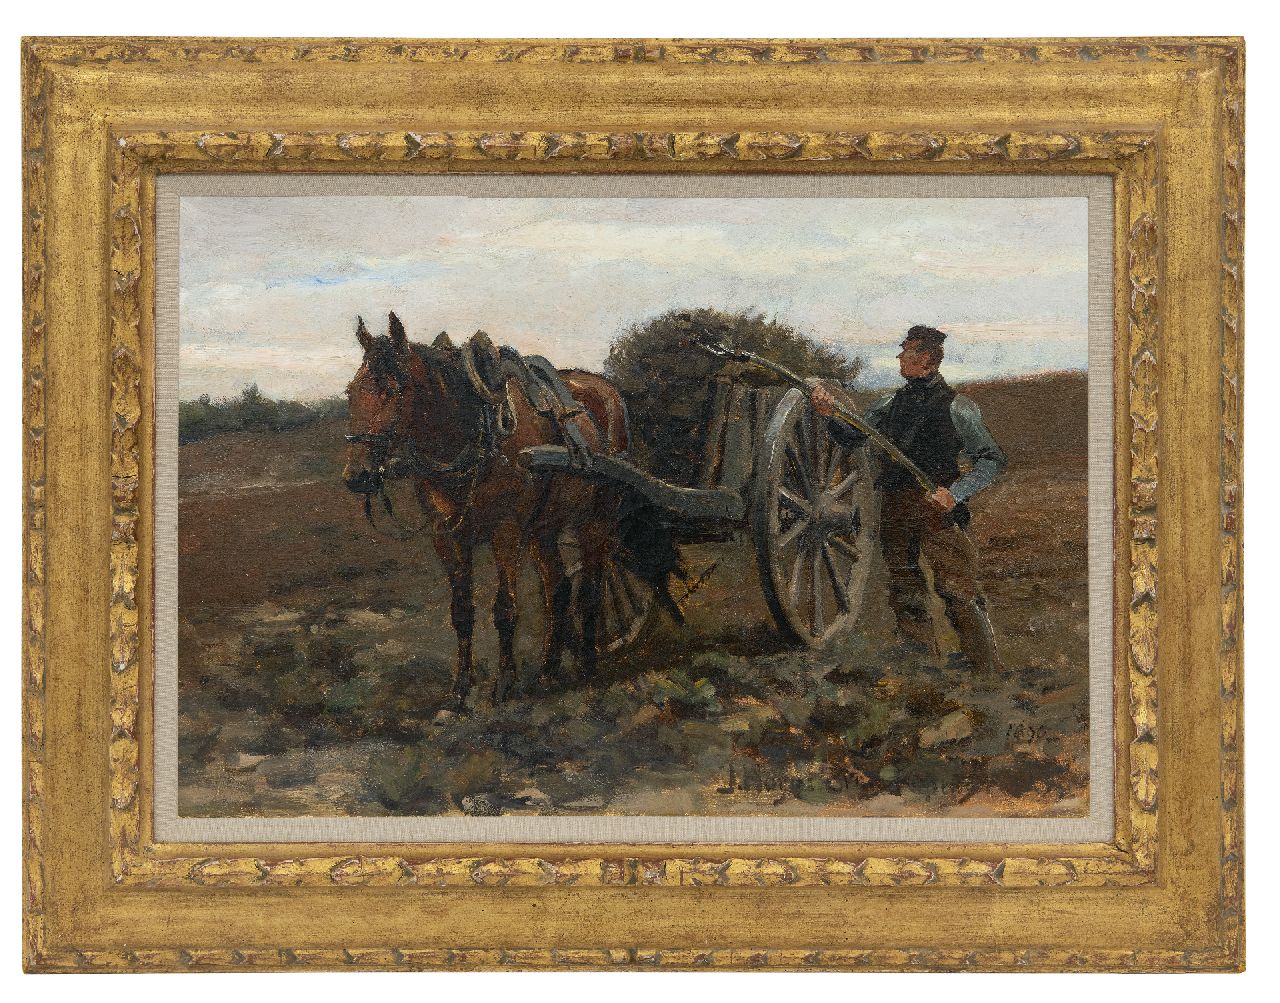 Hoynck van Papendrecht J.  | Jan Hoynck van Papendrecht | Paintings offered for sale | A farmer with horse and cart in the fields, oil on canvas 32.6 x 48.9 cm, signed l.r. and on a label on the stretcher and dated 1890